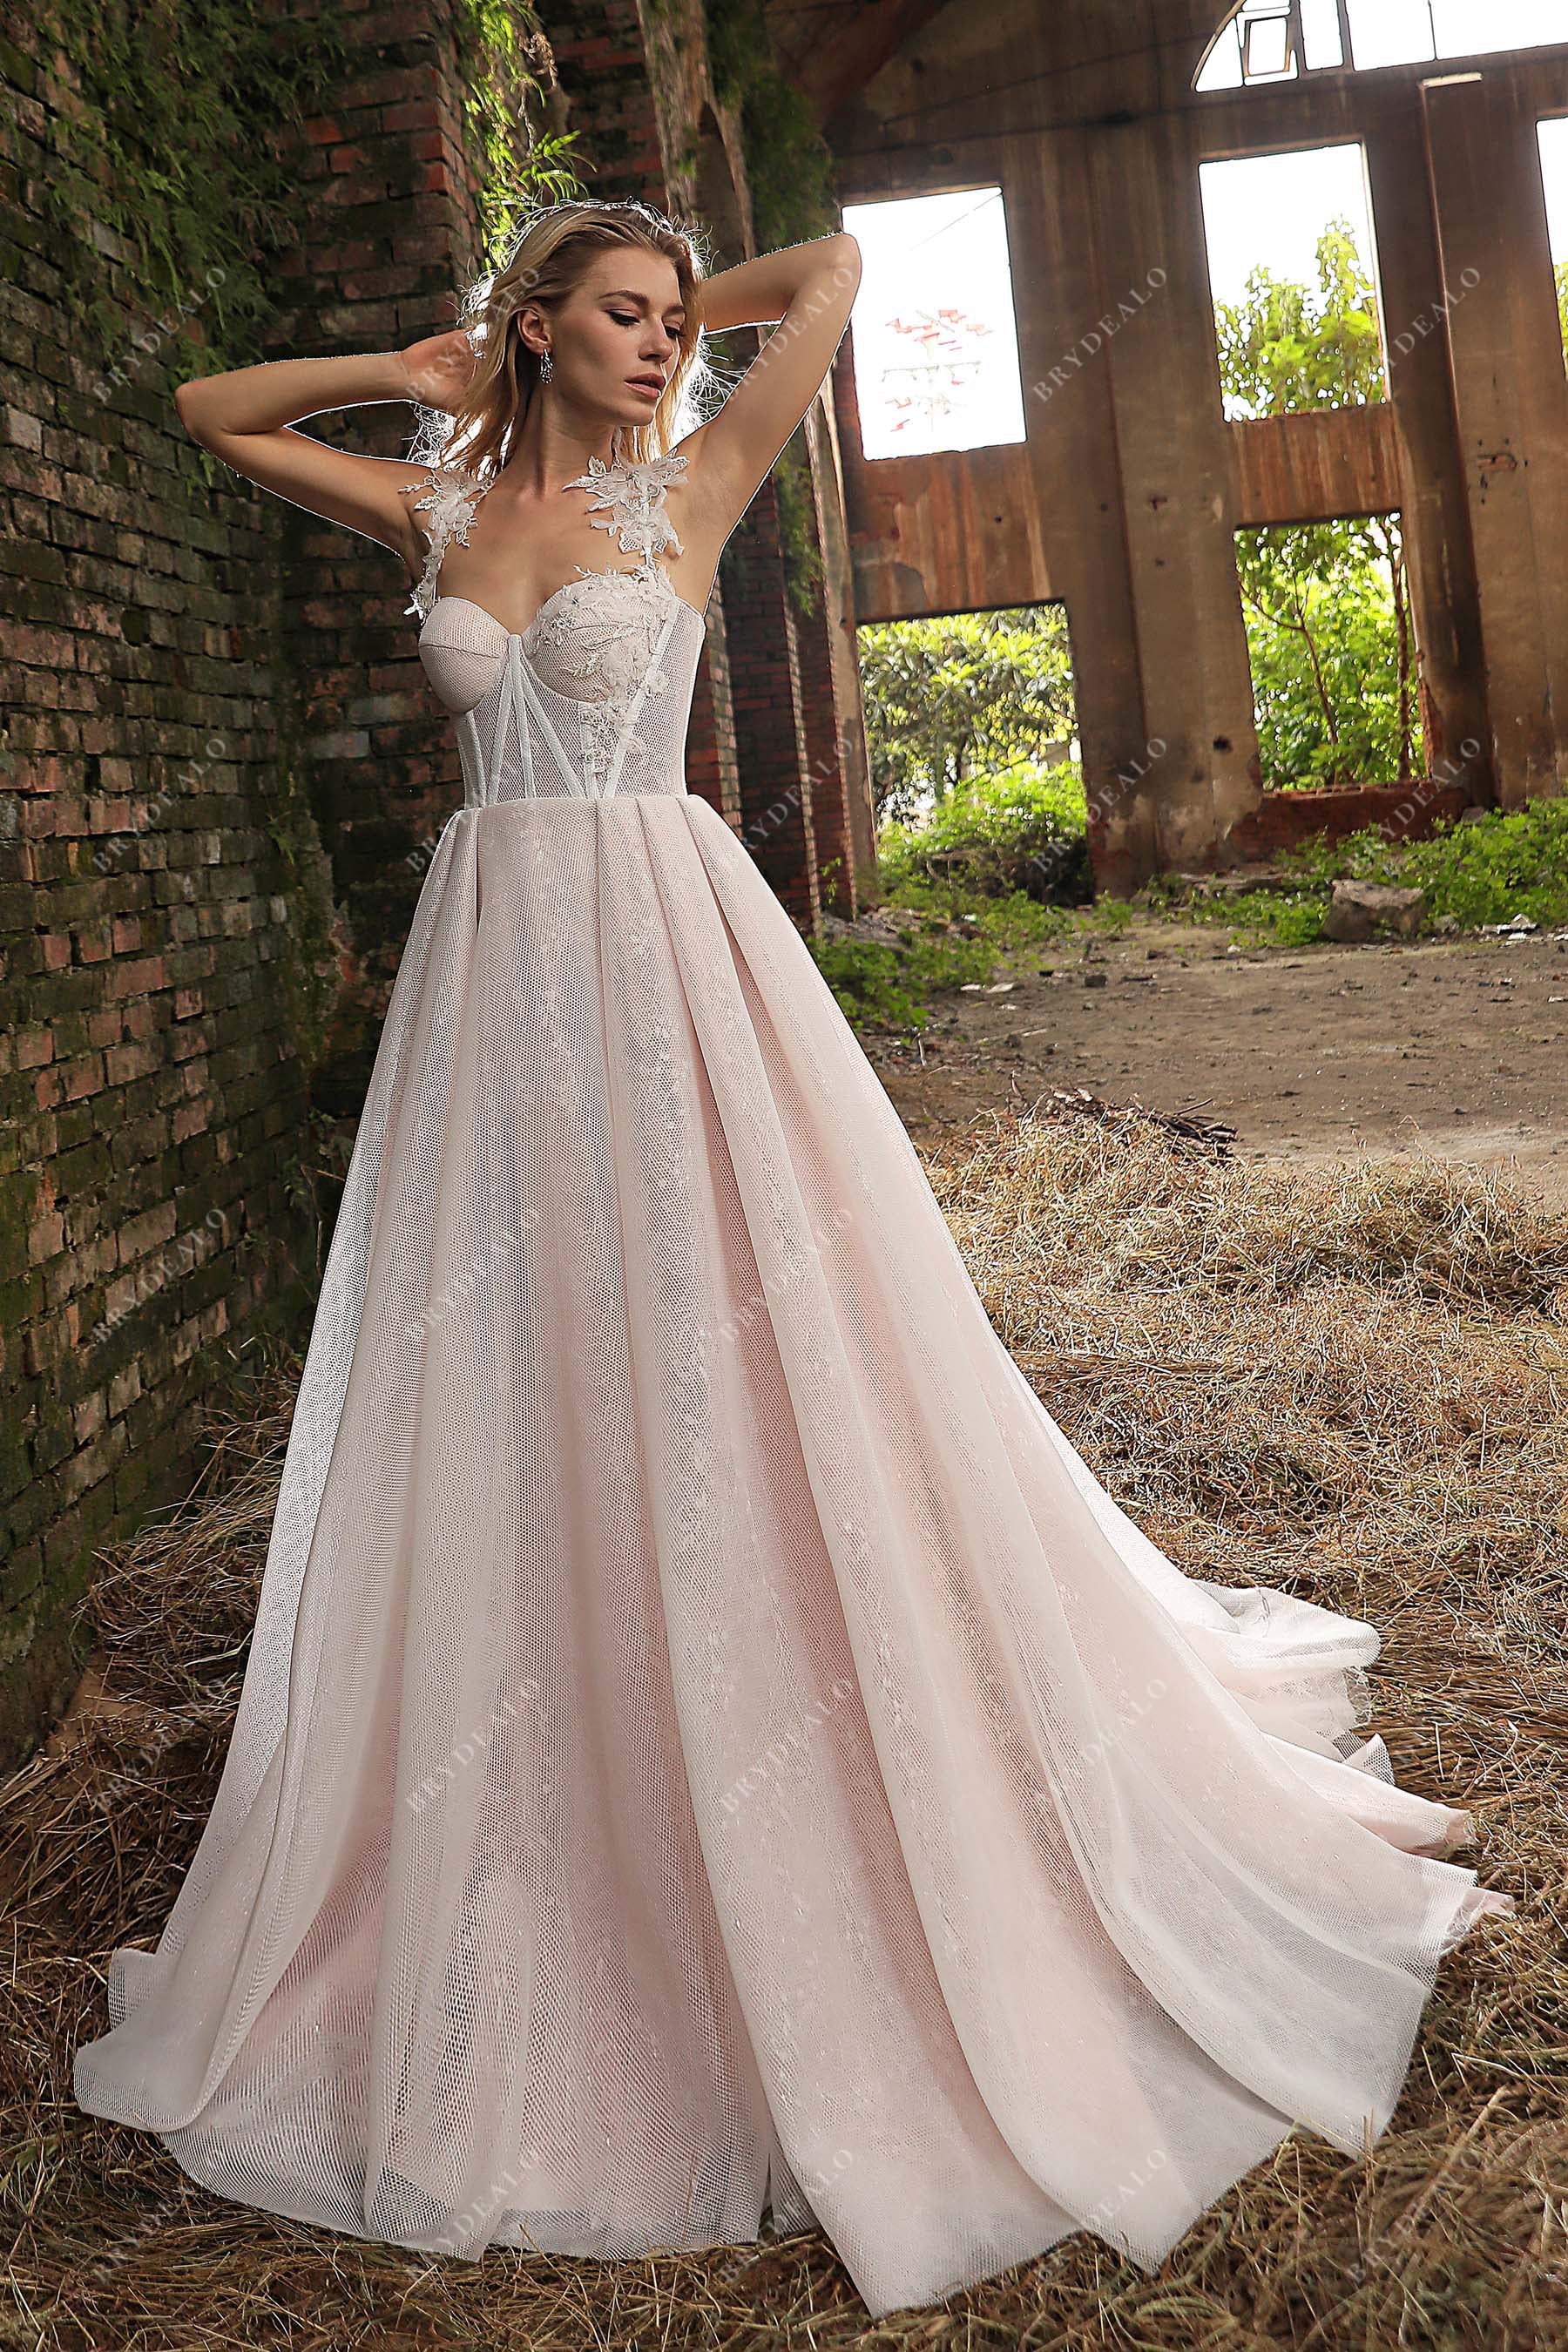 Designer Sweetheart Neck Pinkish Corset A-line Bridal Gown